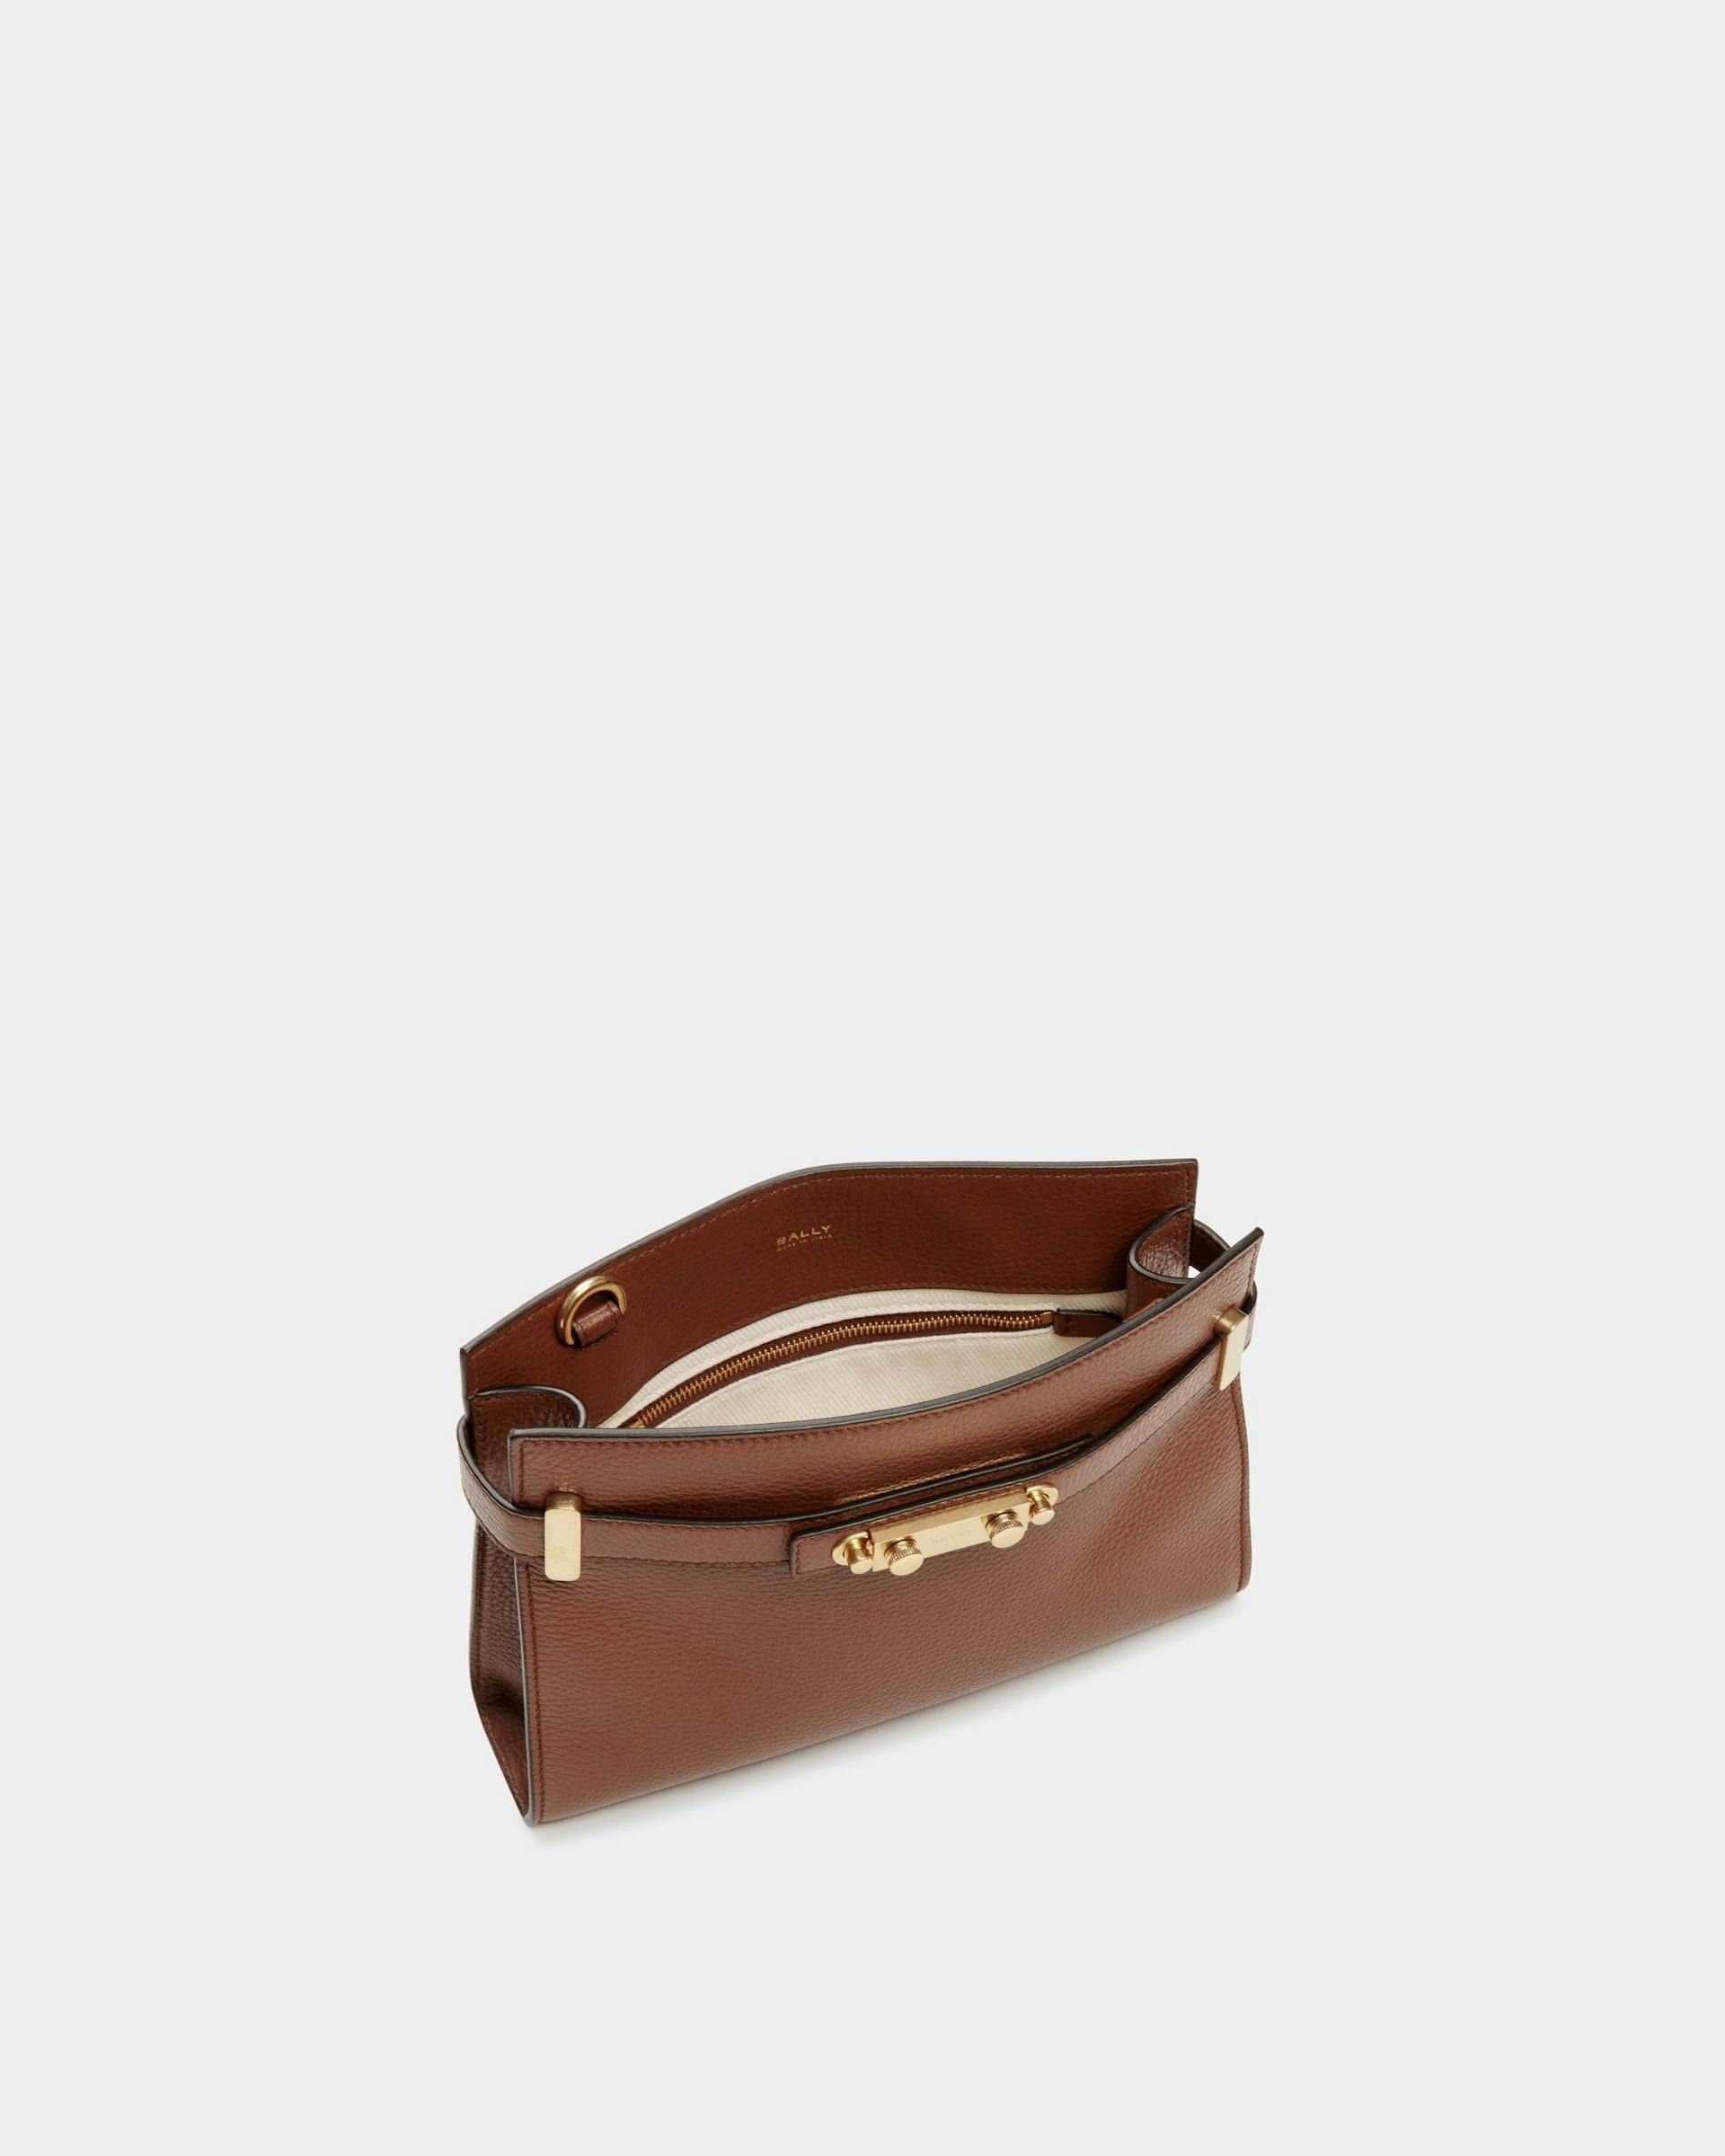 Women's Carriage Crossbody Bag in Brown Grained Leather | Bally | Still Life Open / Inside